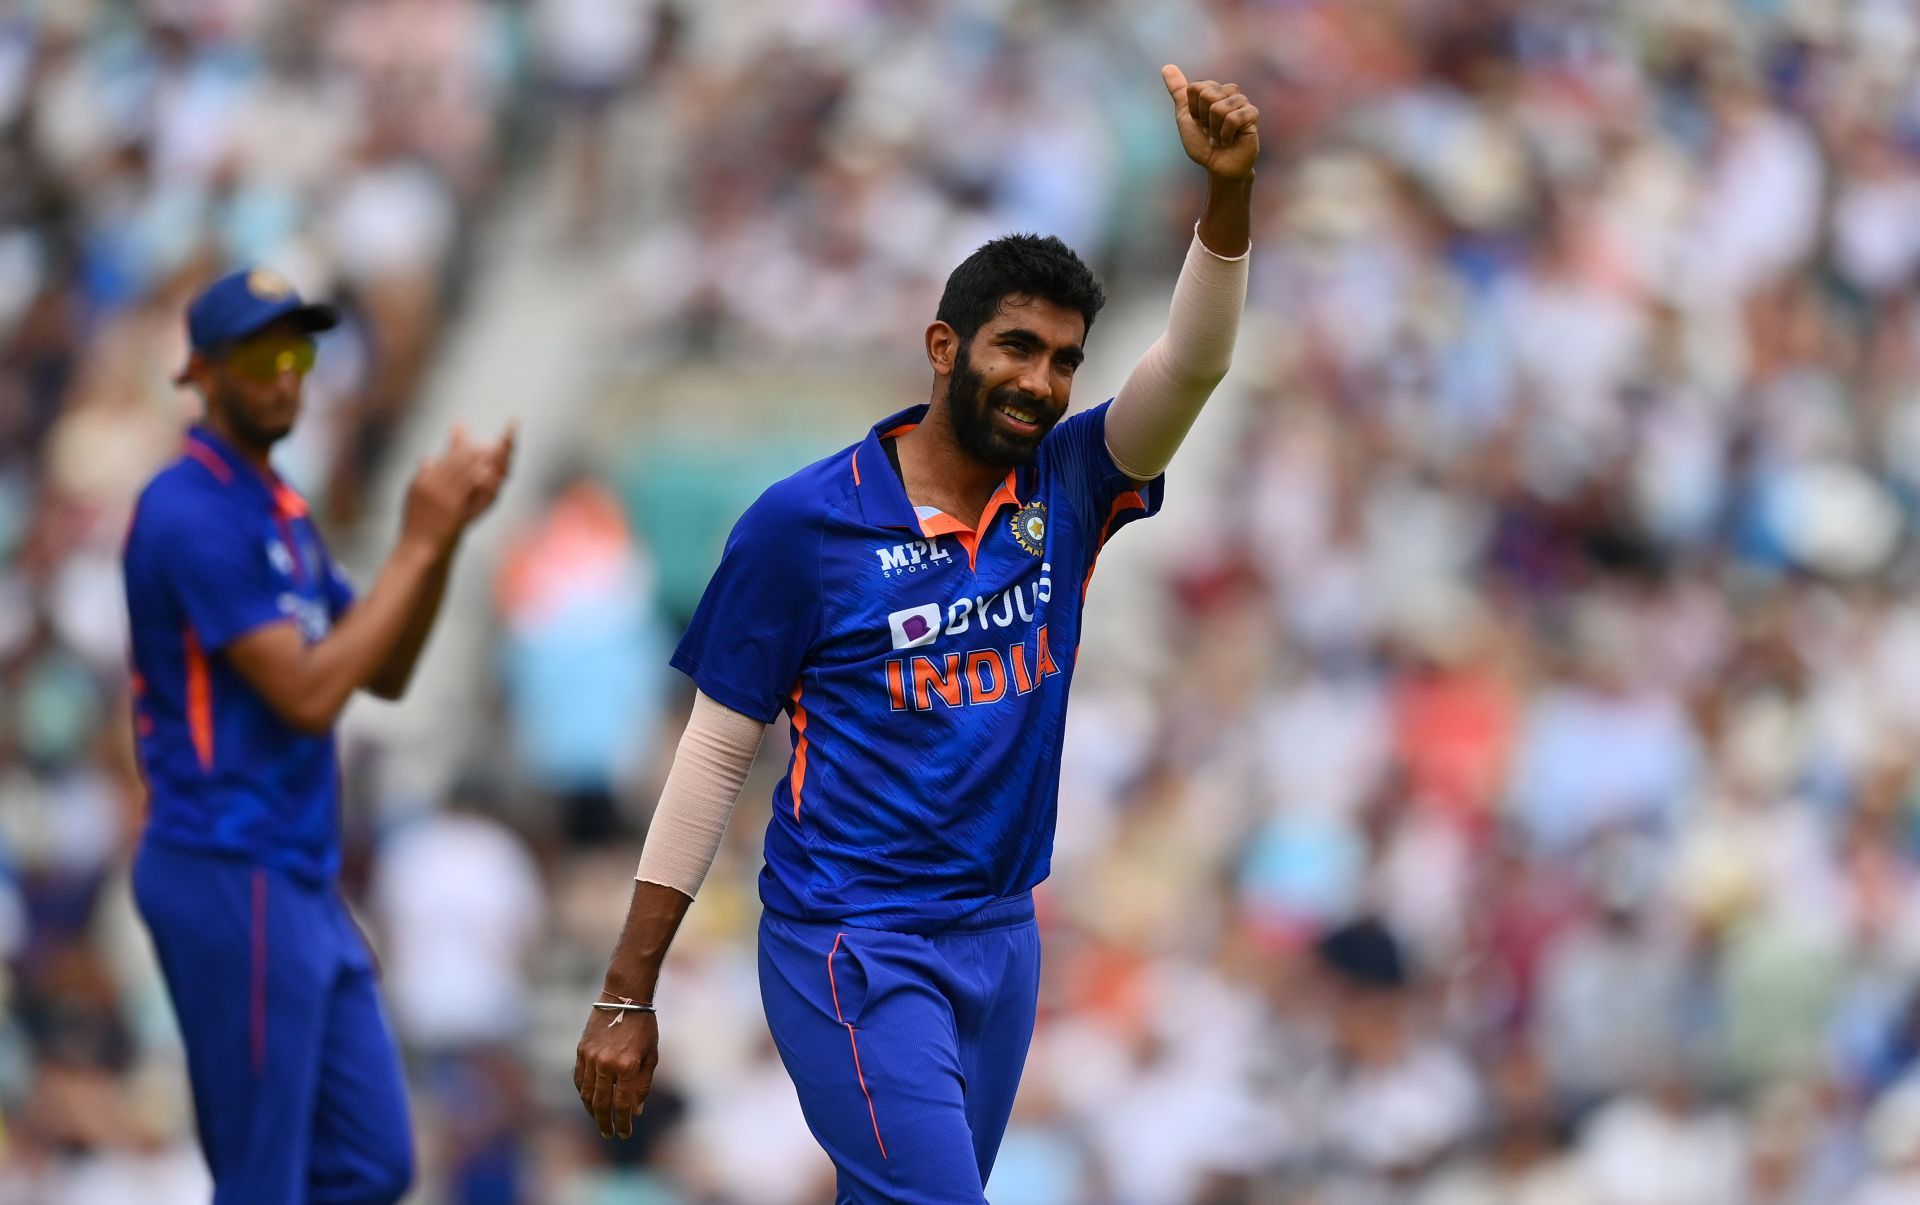 Bumrah has been exceptional for India in ODIs